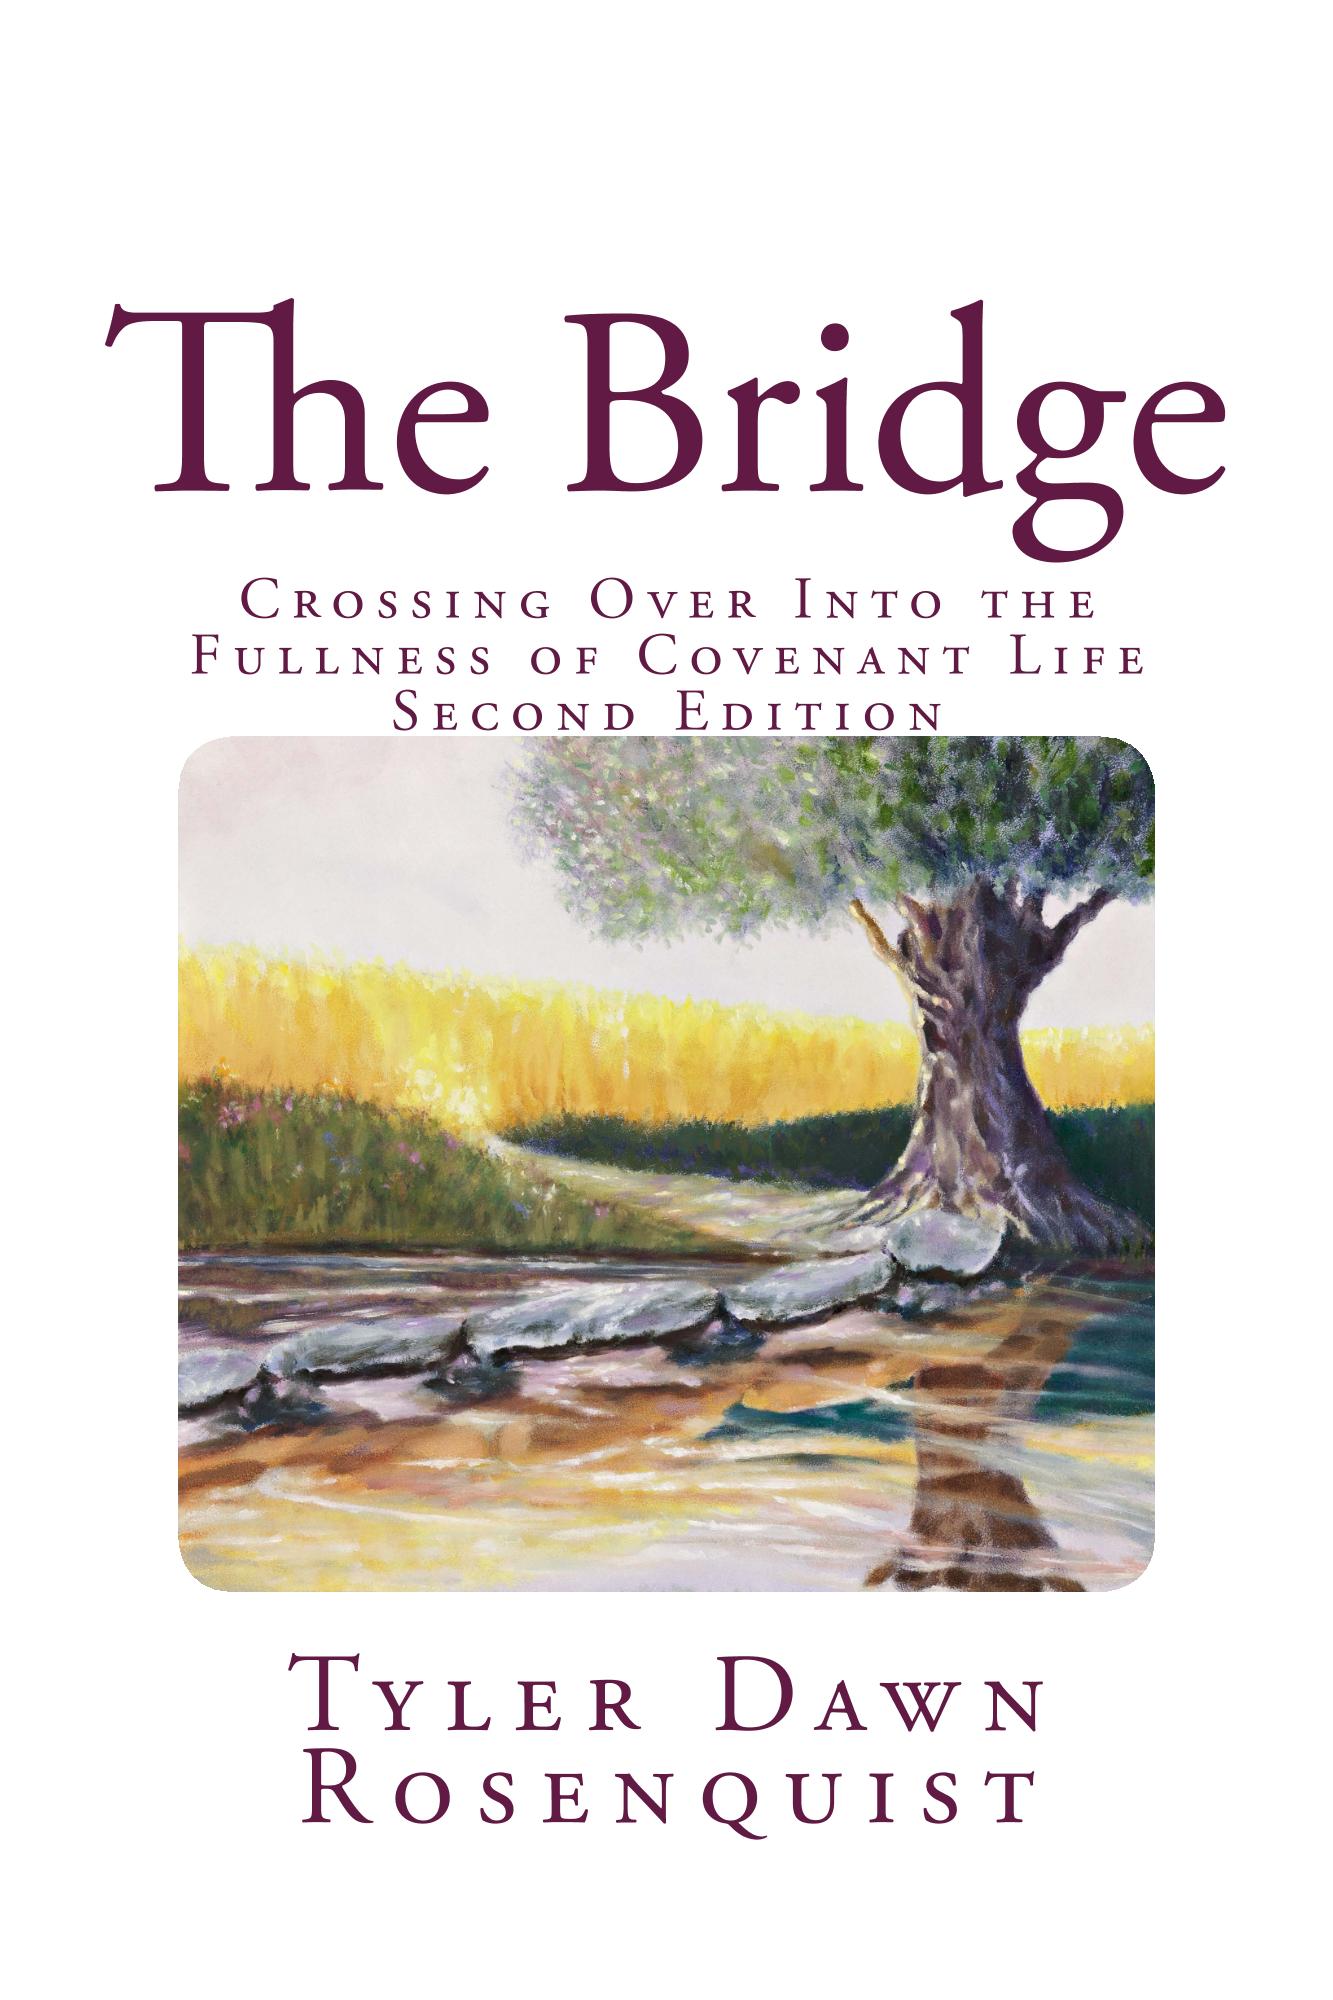 “So What About Christmas and Easter?” – From my rewrite of The Bridge: Crossing Over Into the Fullness of Covenant Life